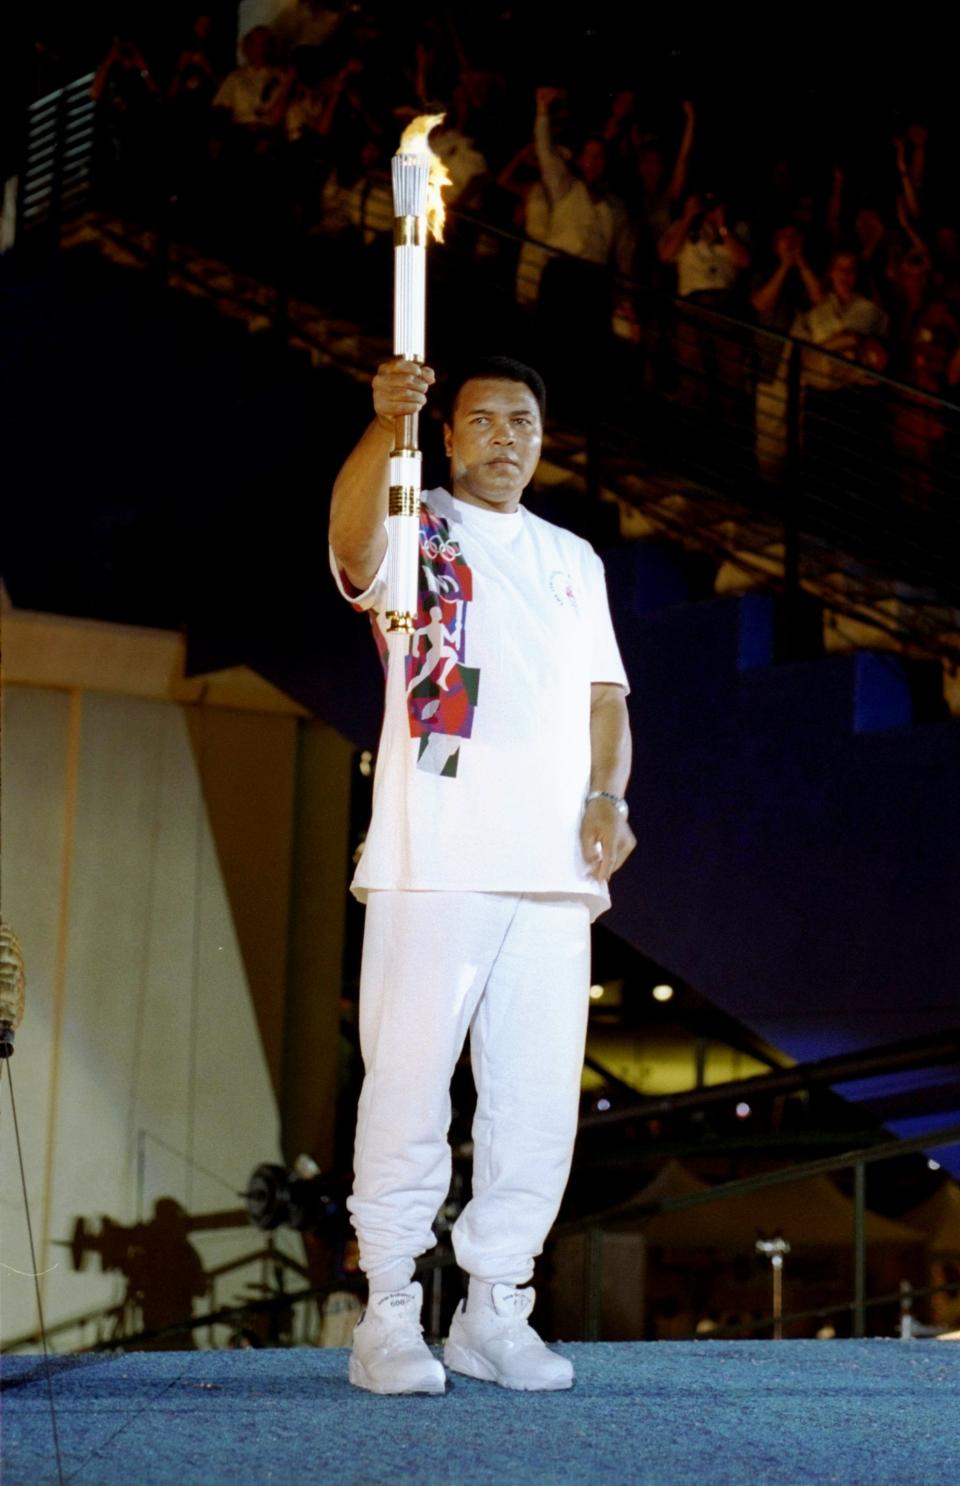 Muhammad Ali holding the Olympic torch at the 1996 Olympics in Atlanta. (Photo: Getty Images).